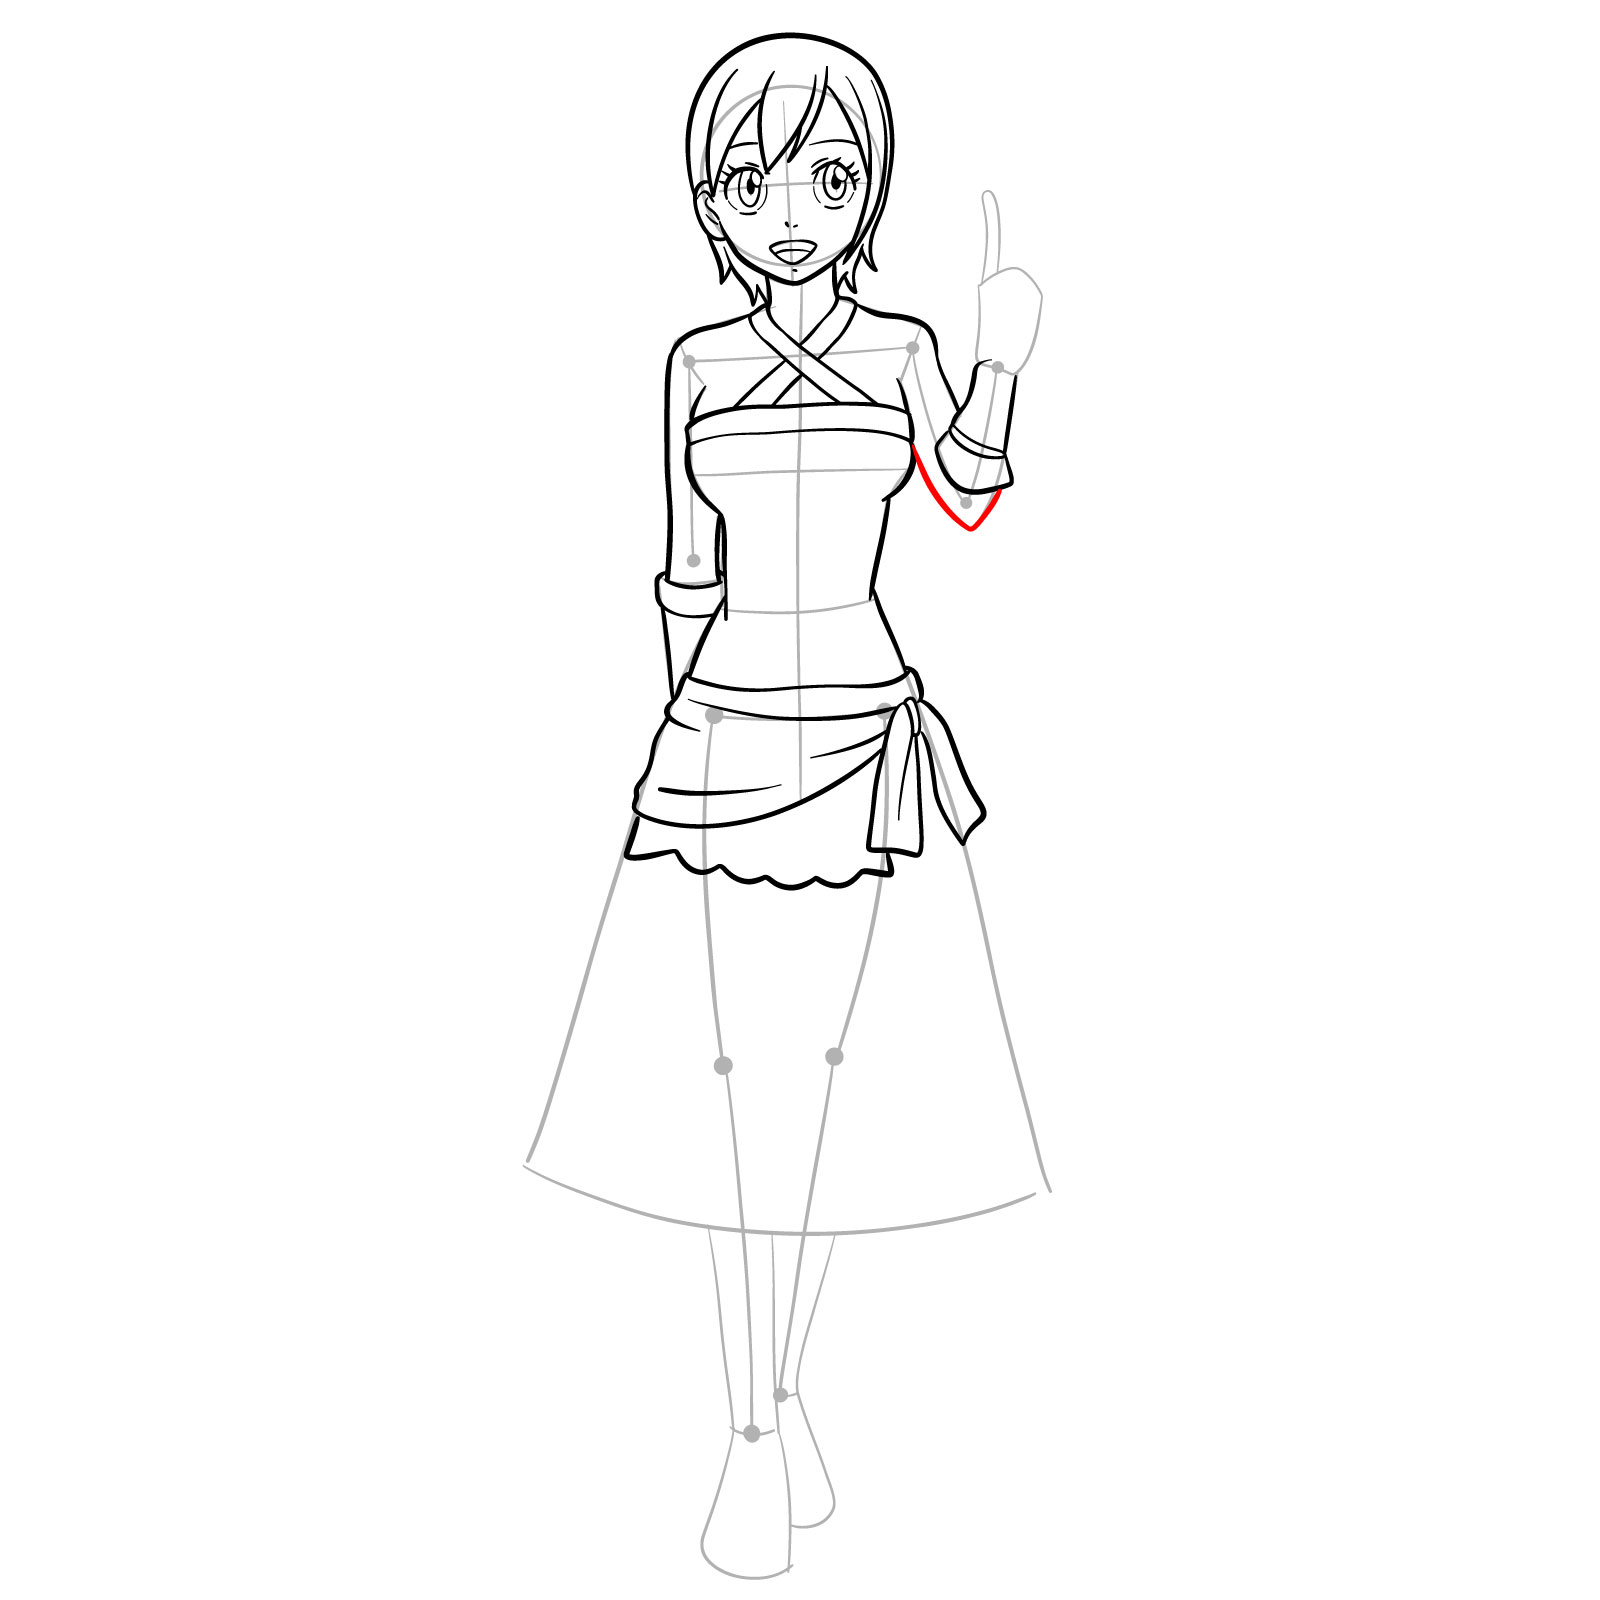 How to draw Lisanna Strauss from Fairy Tail - step 24